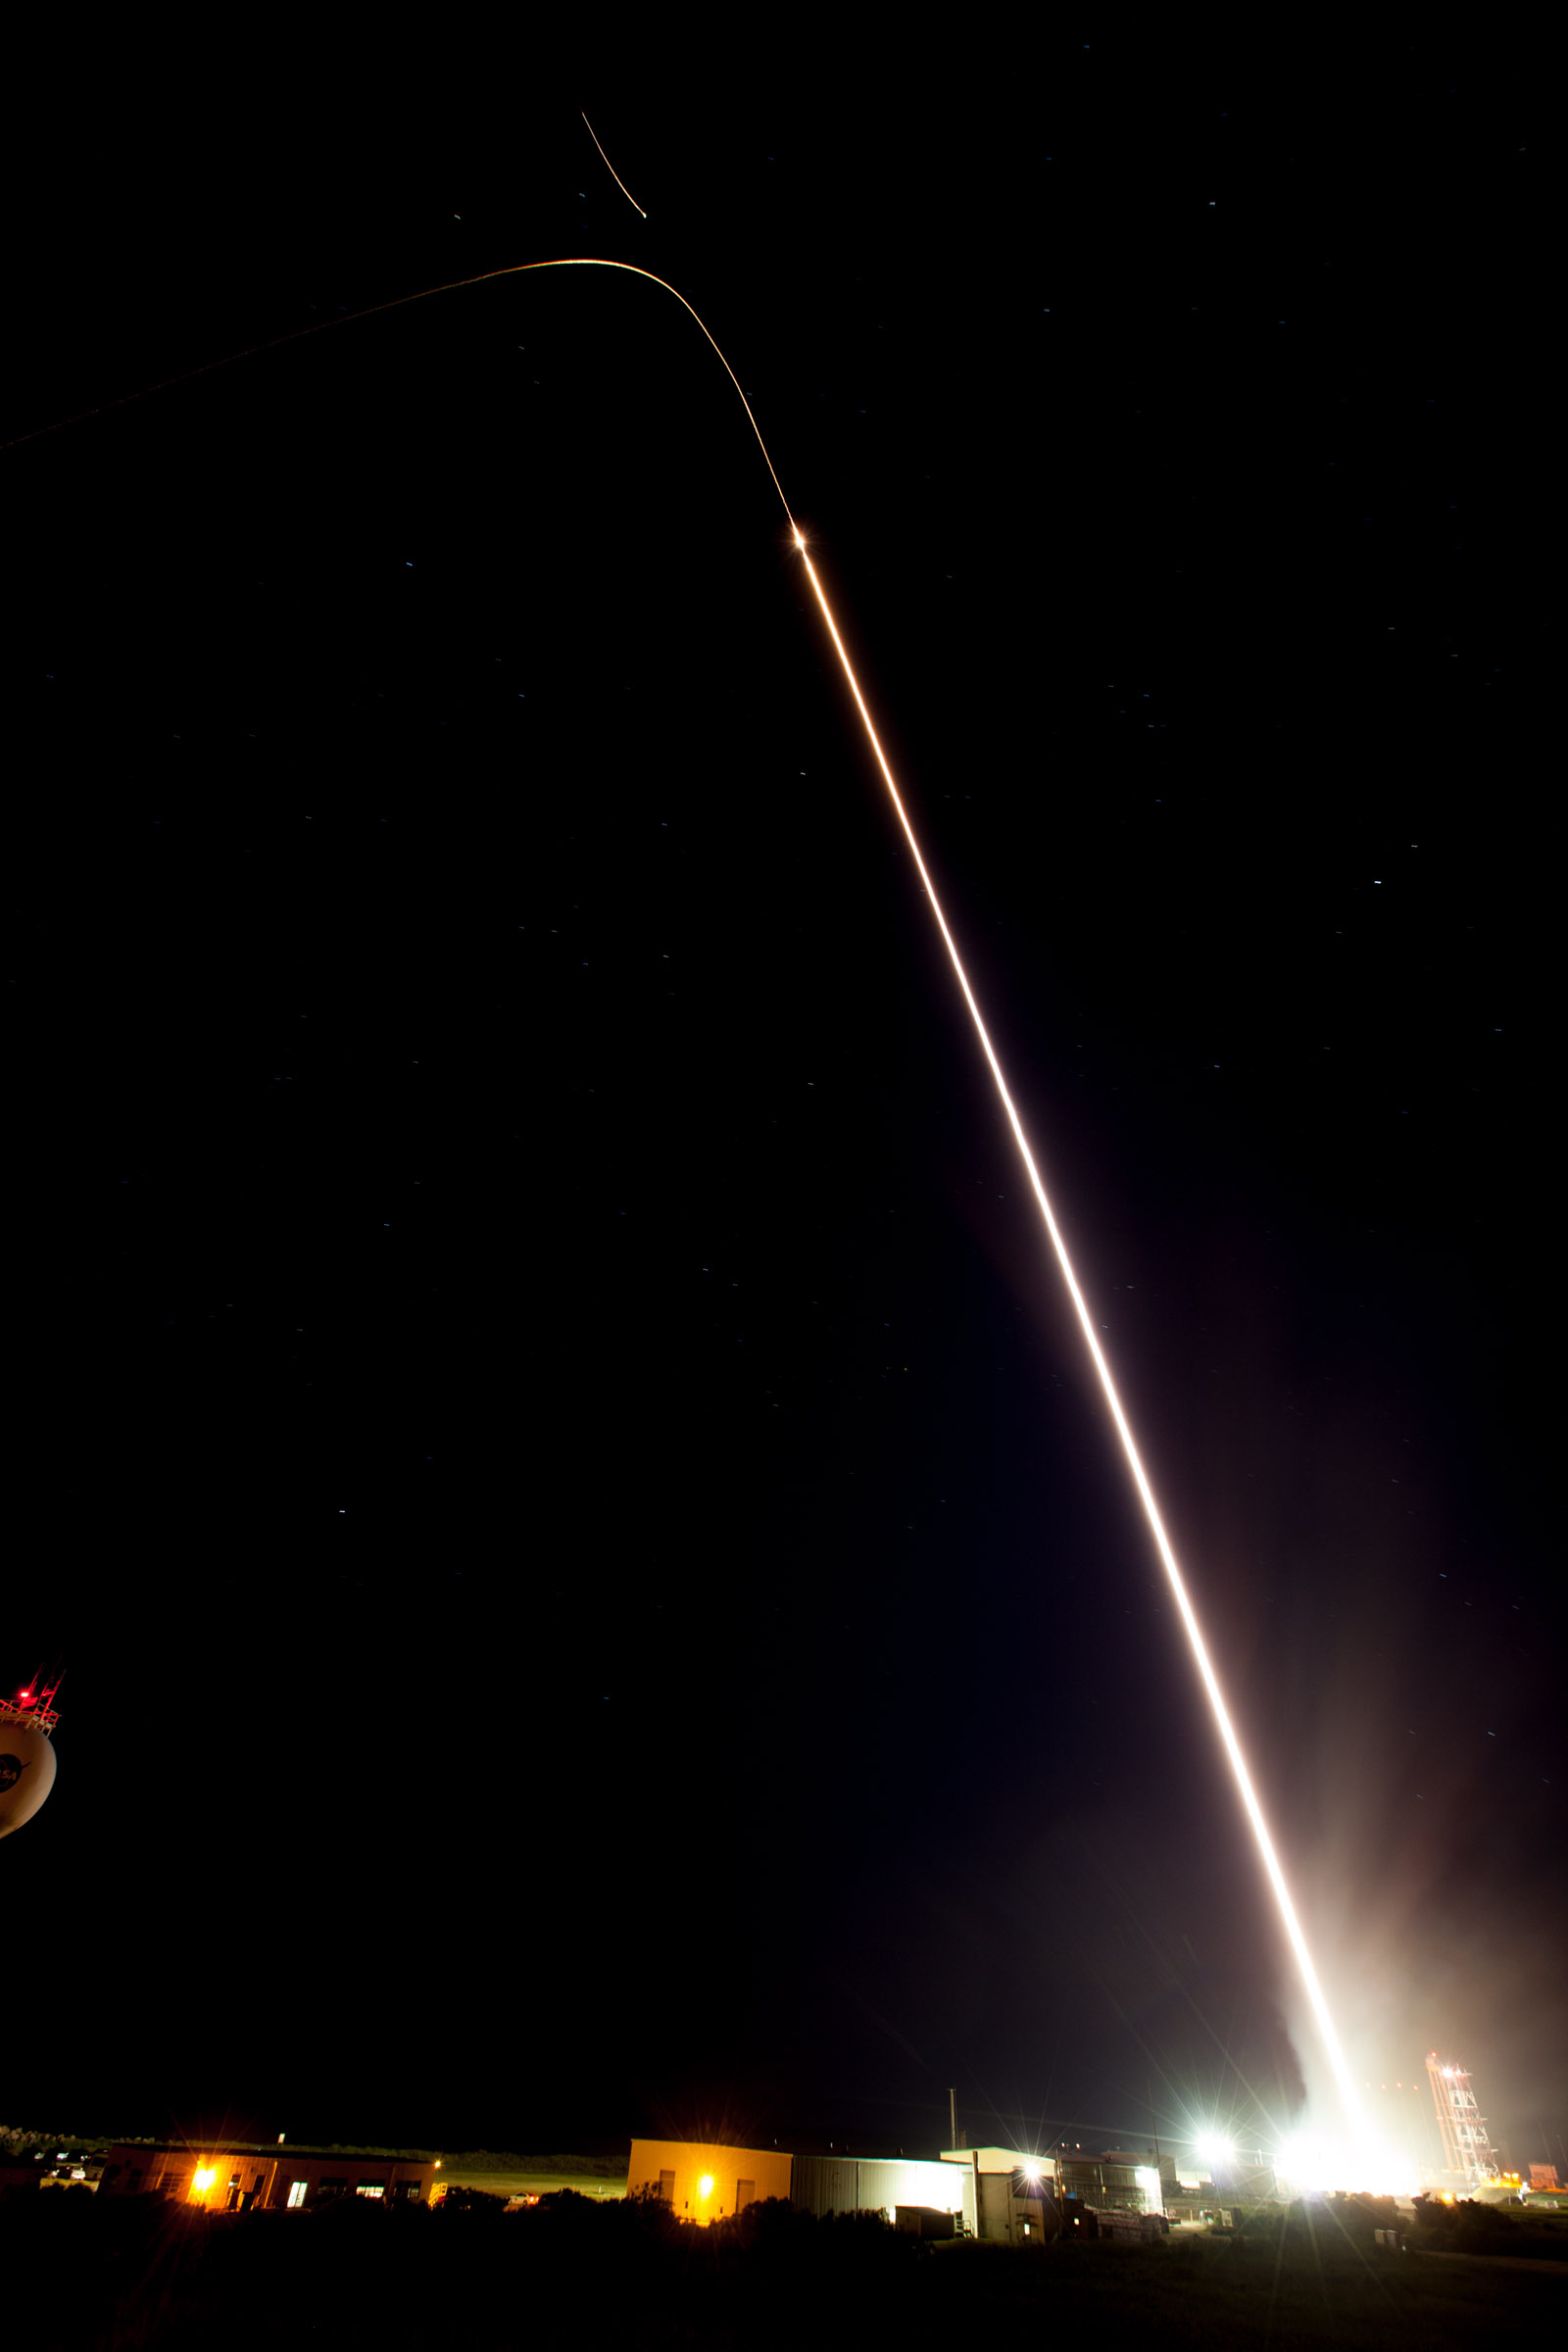 A long exposure image of a sounding rocket launching, represented by a white streak.